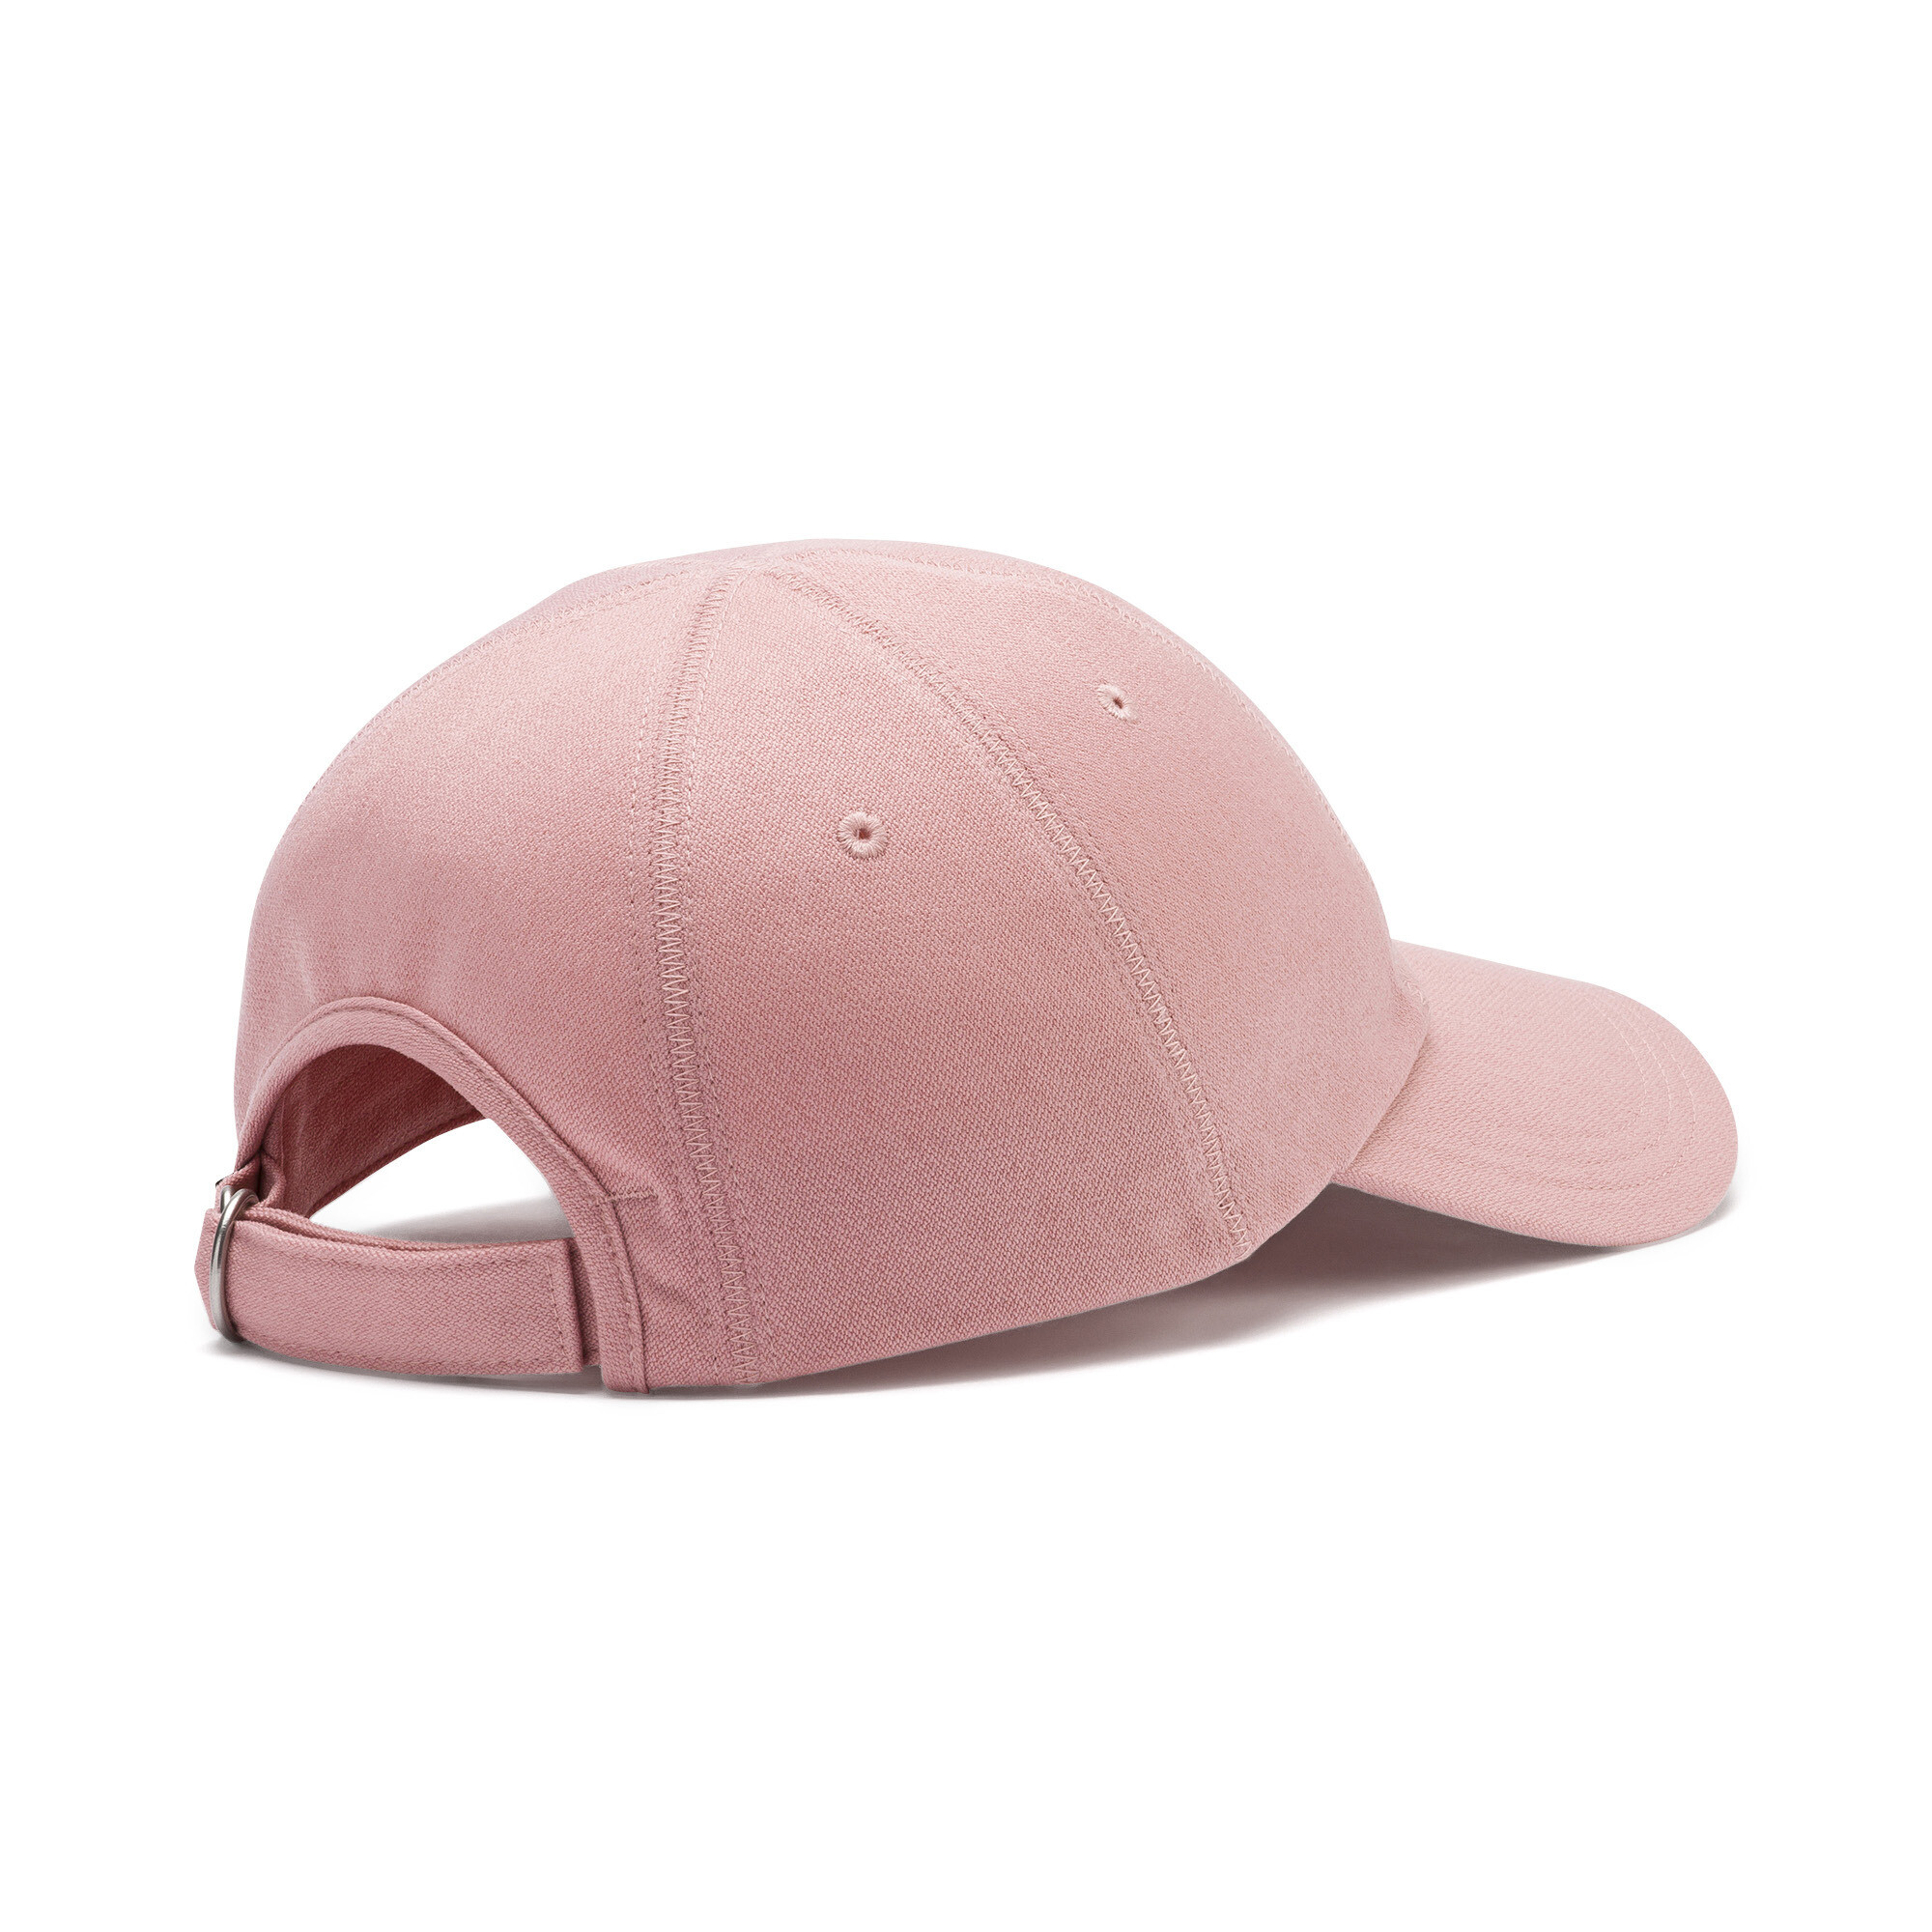 Puma Downtown Cap, Pink, Size Adult, Accessories